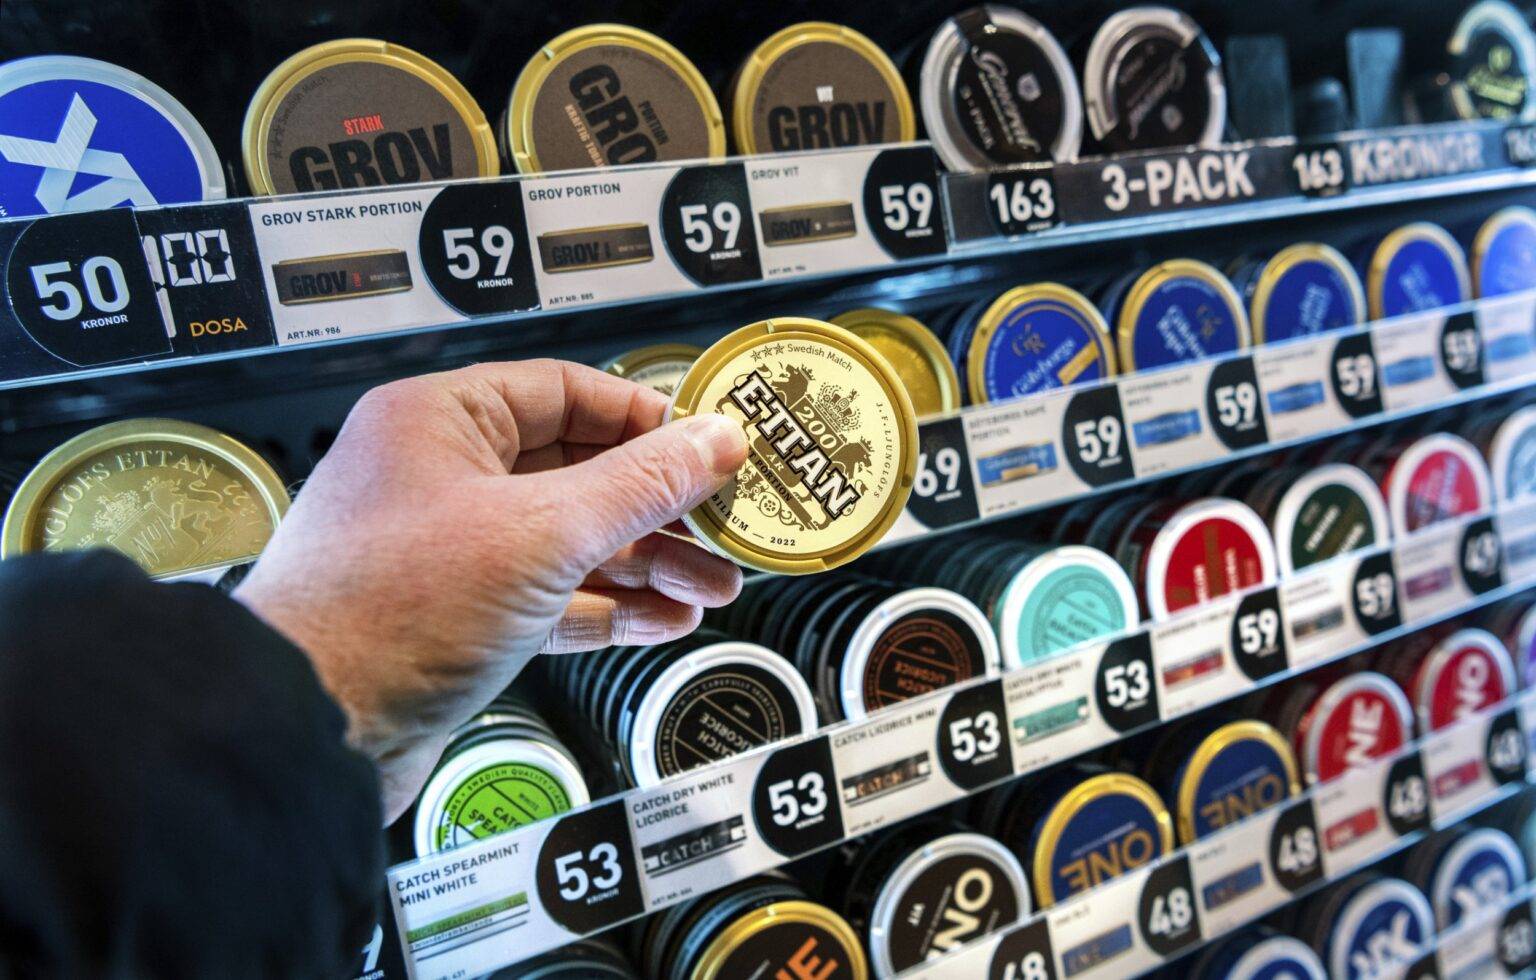 Sweden’s love of snus could be why the country is on course to be smoke-free